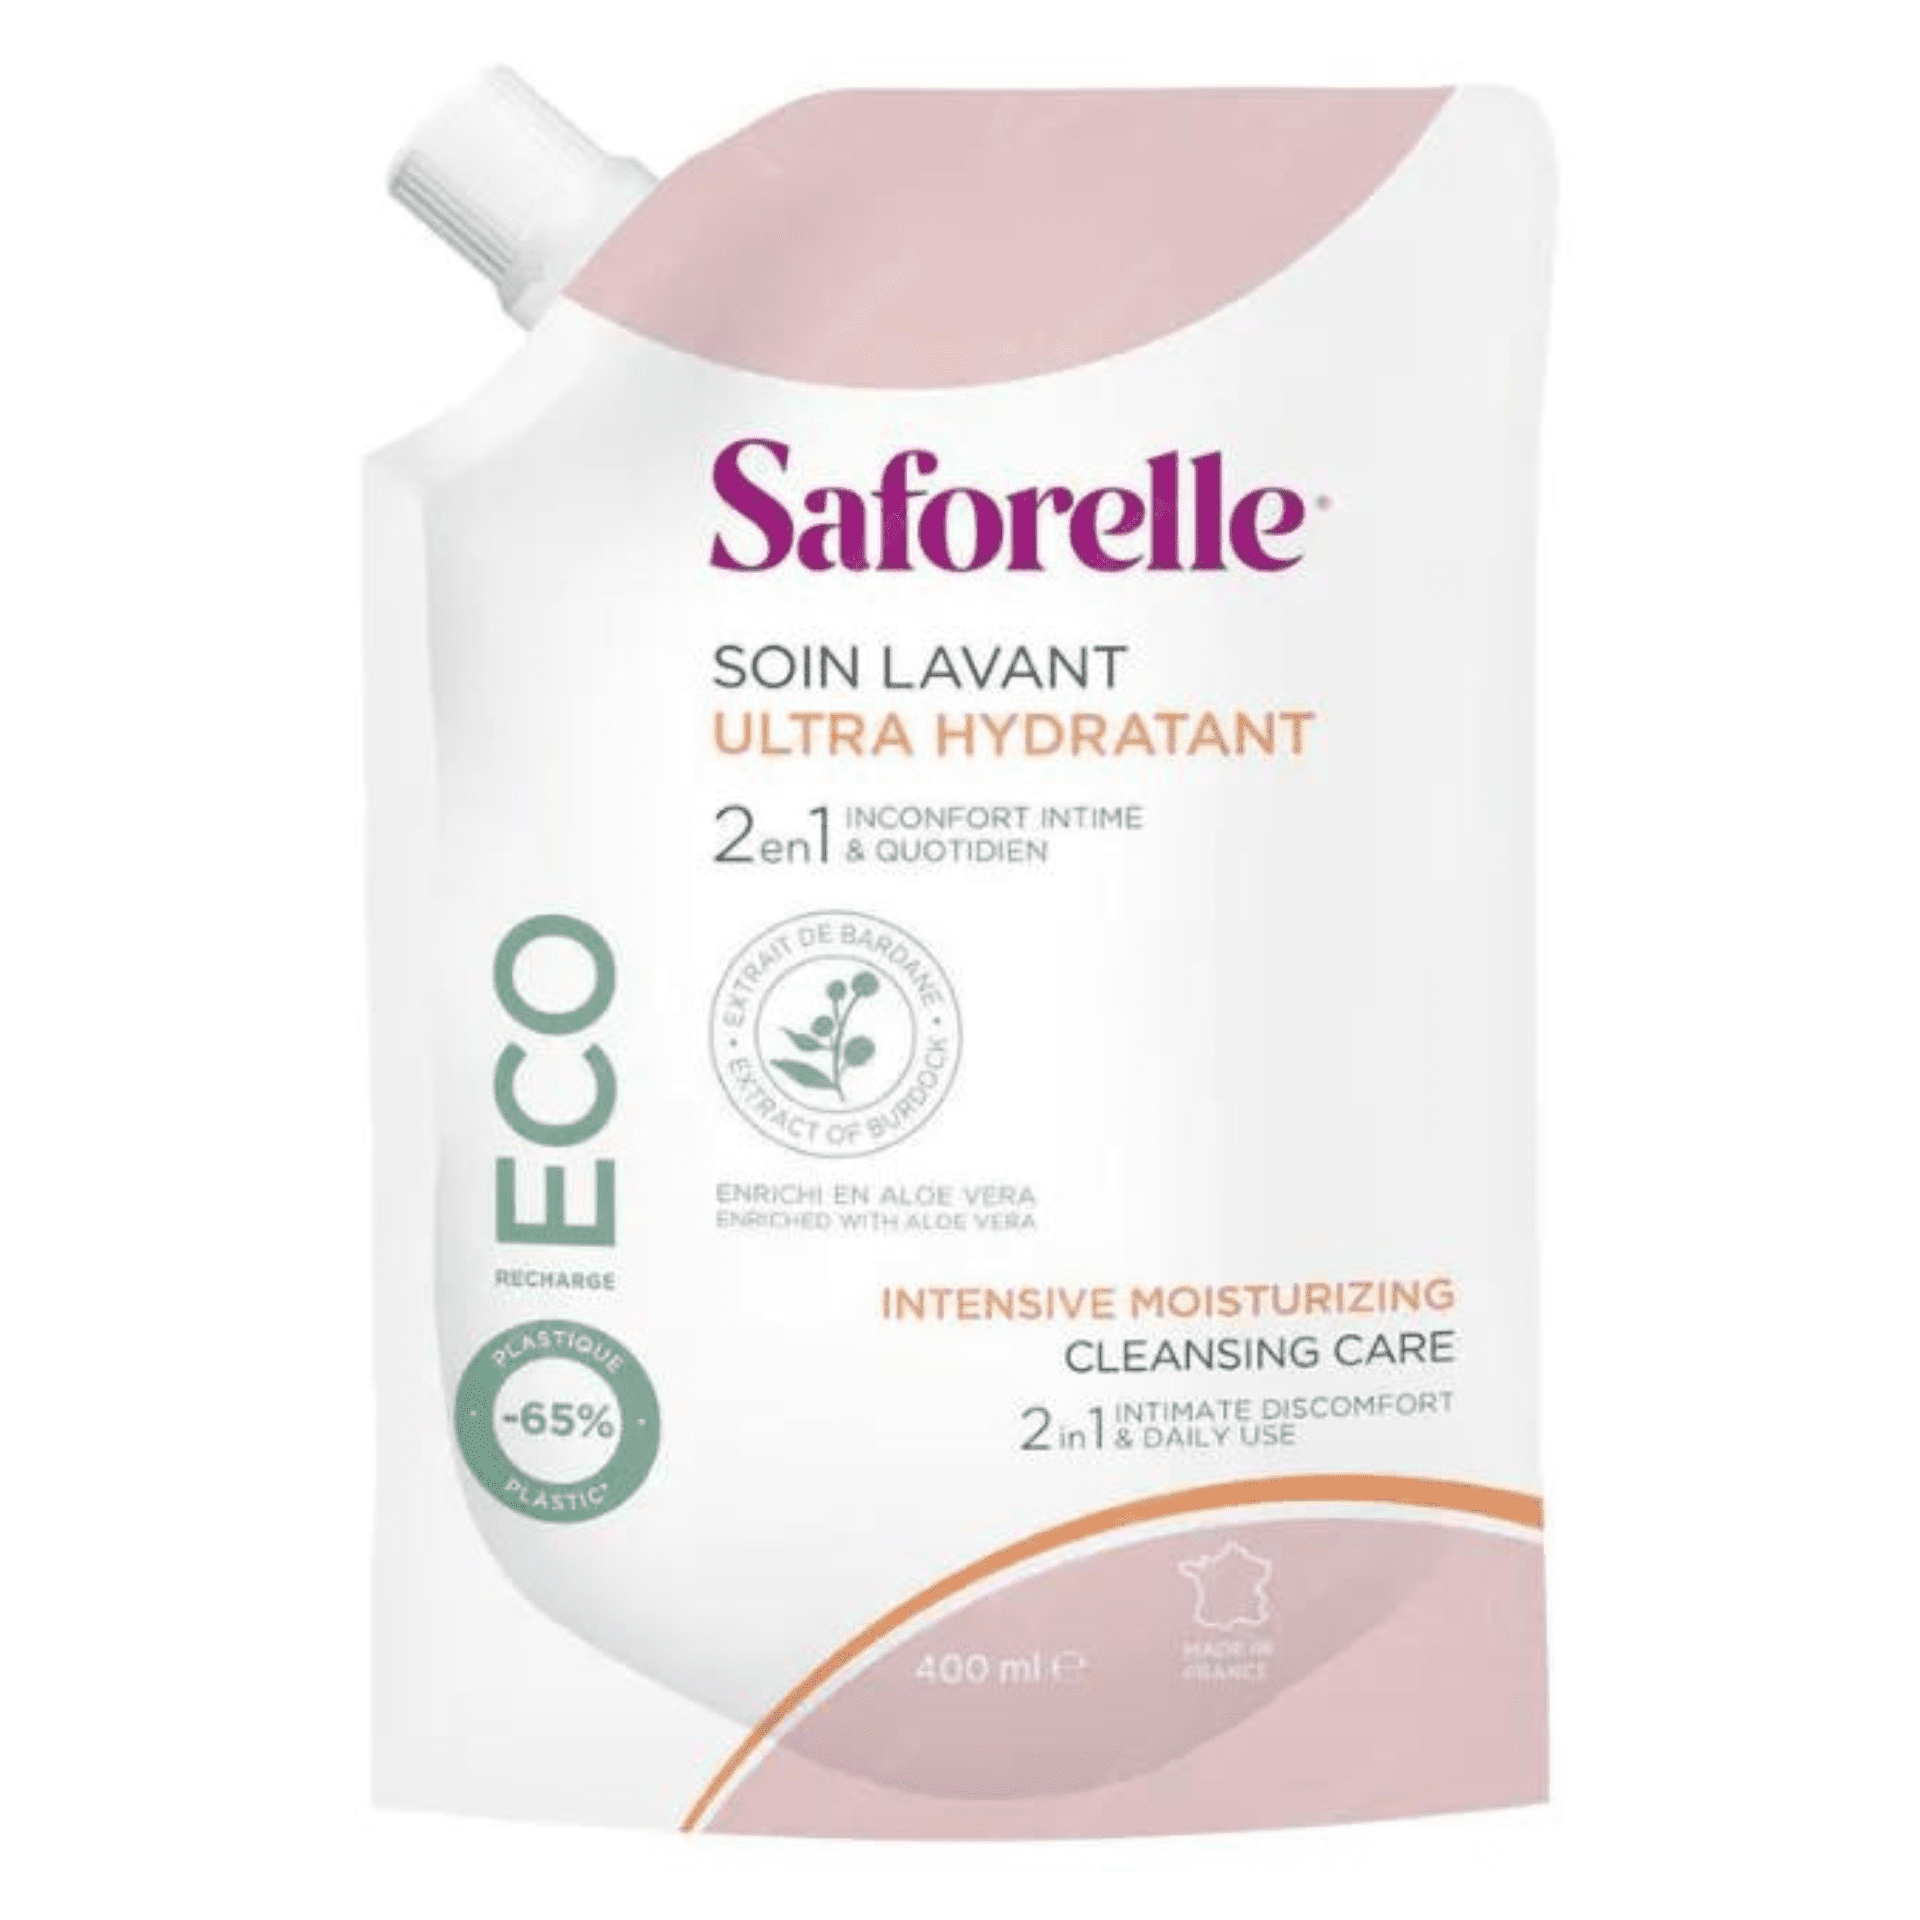 Saforelle Intensive Moisturizing Cleansing Care Eco Navulling